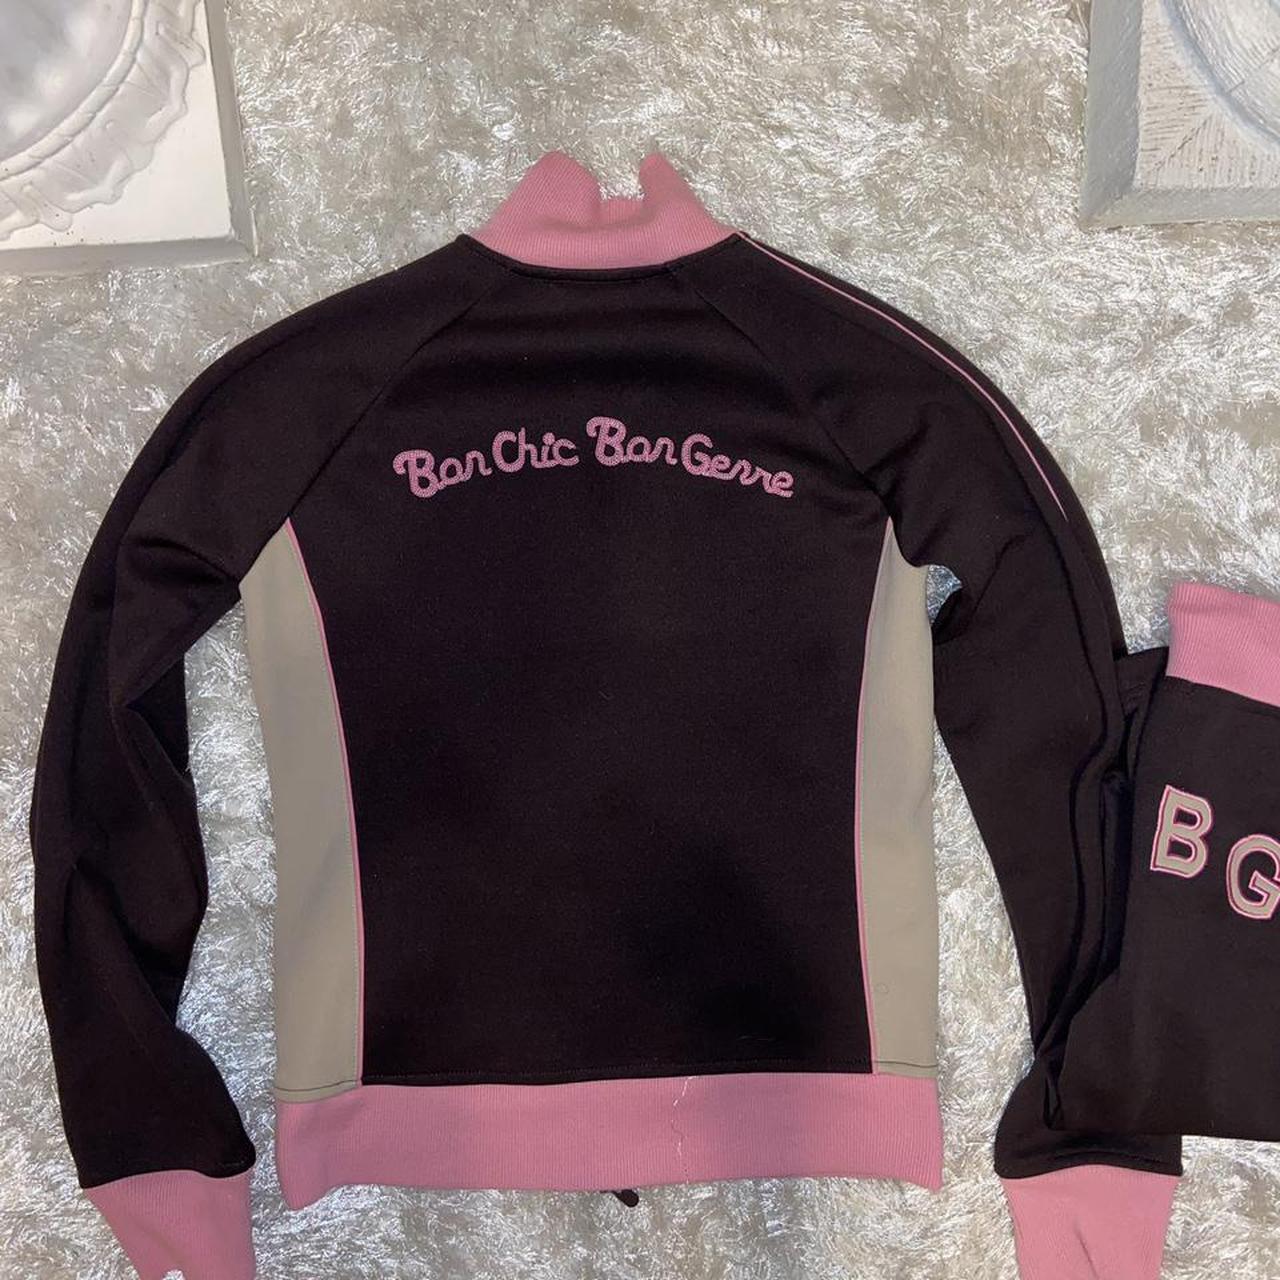 Product Image 3 - BCBG(logo) Tracksuit/Set

❌Will Not Separate❌

Height: 5’2
Weight: